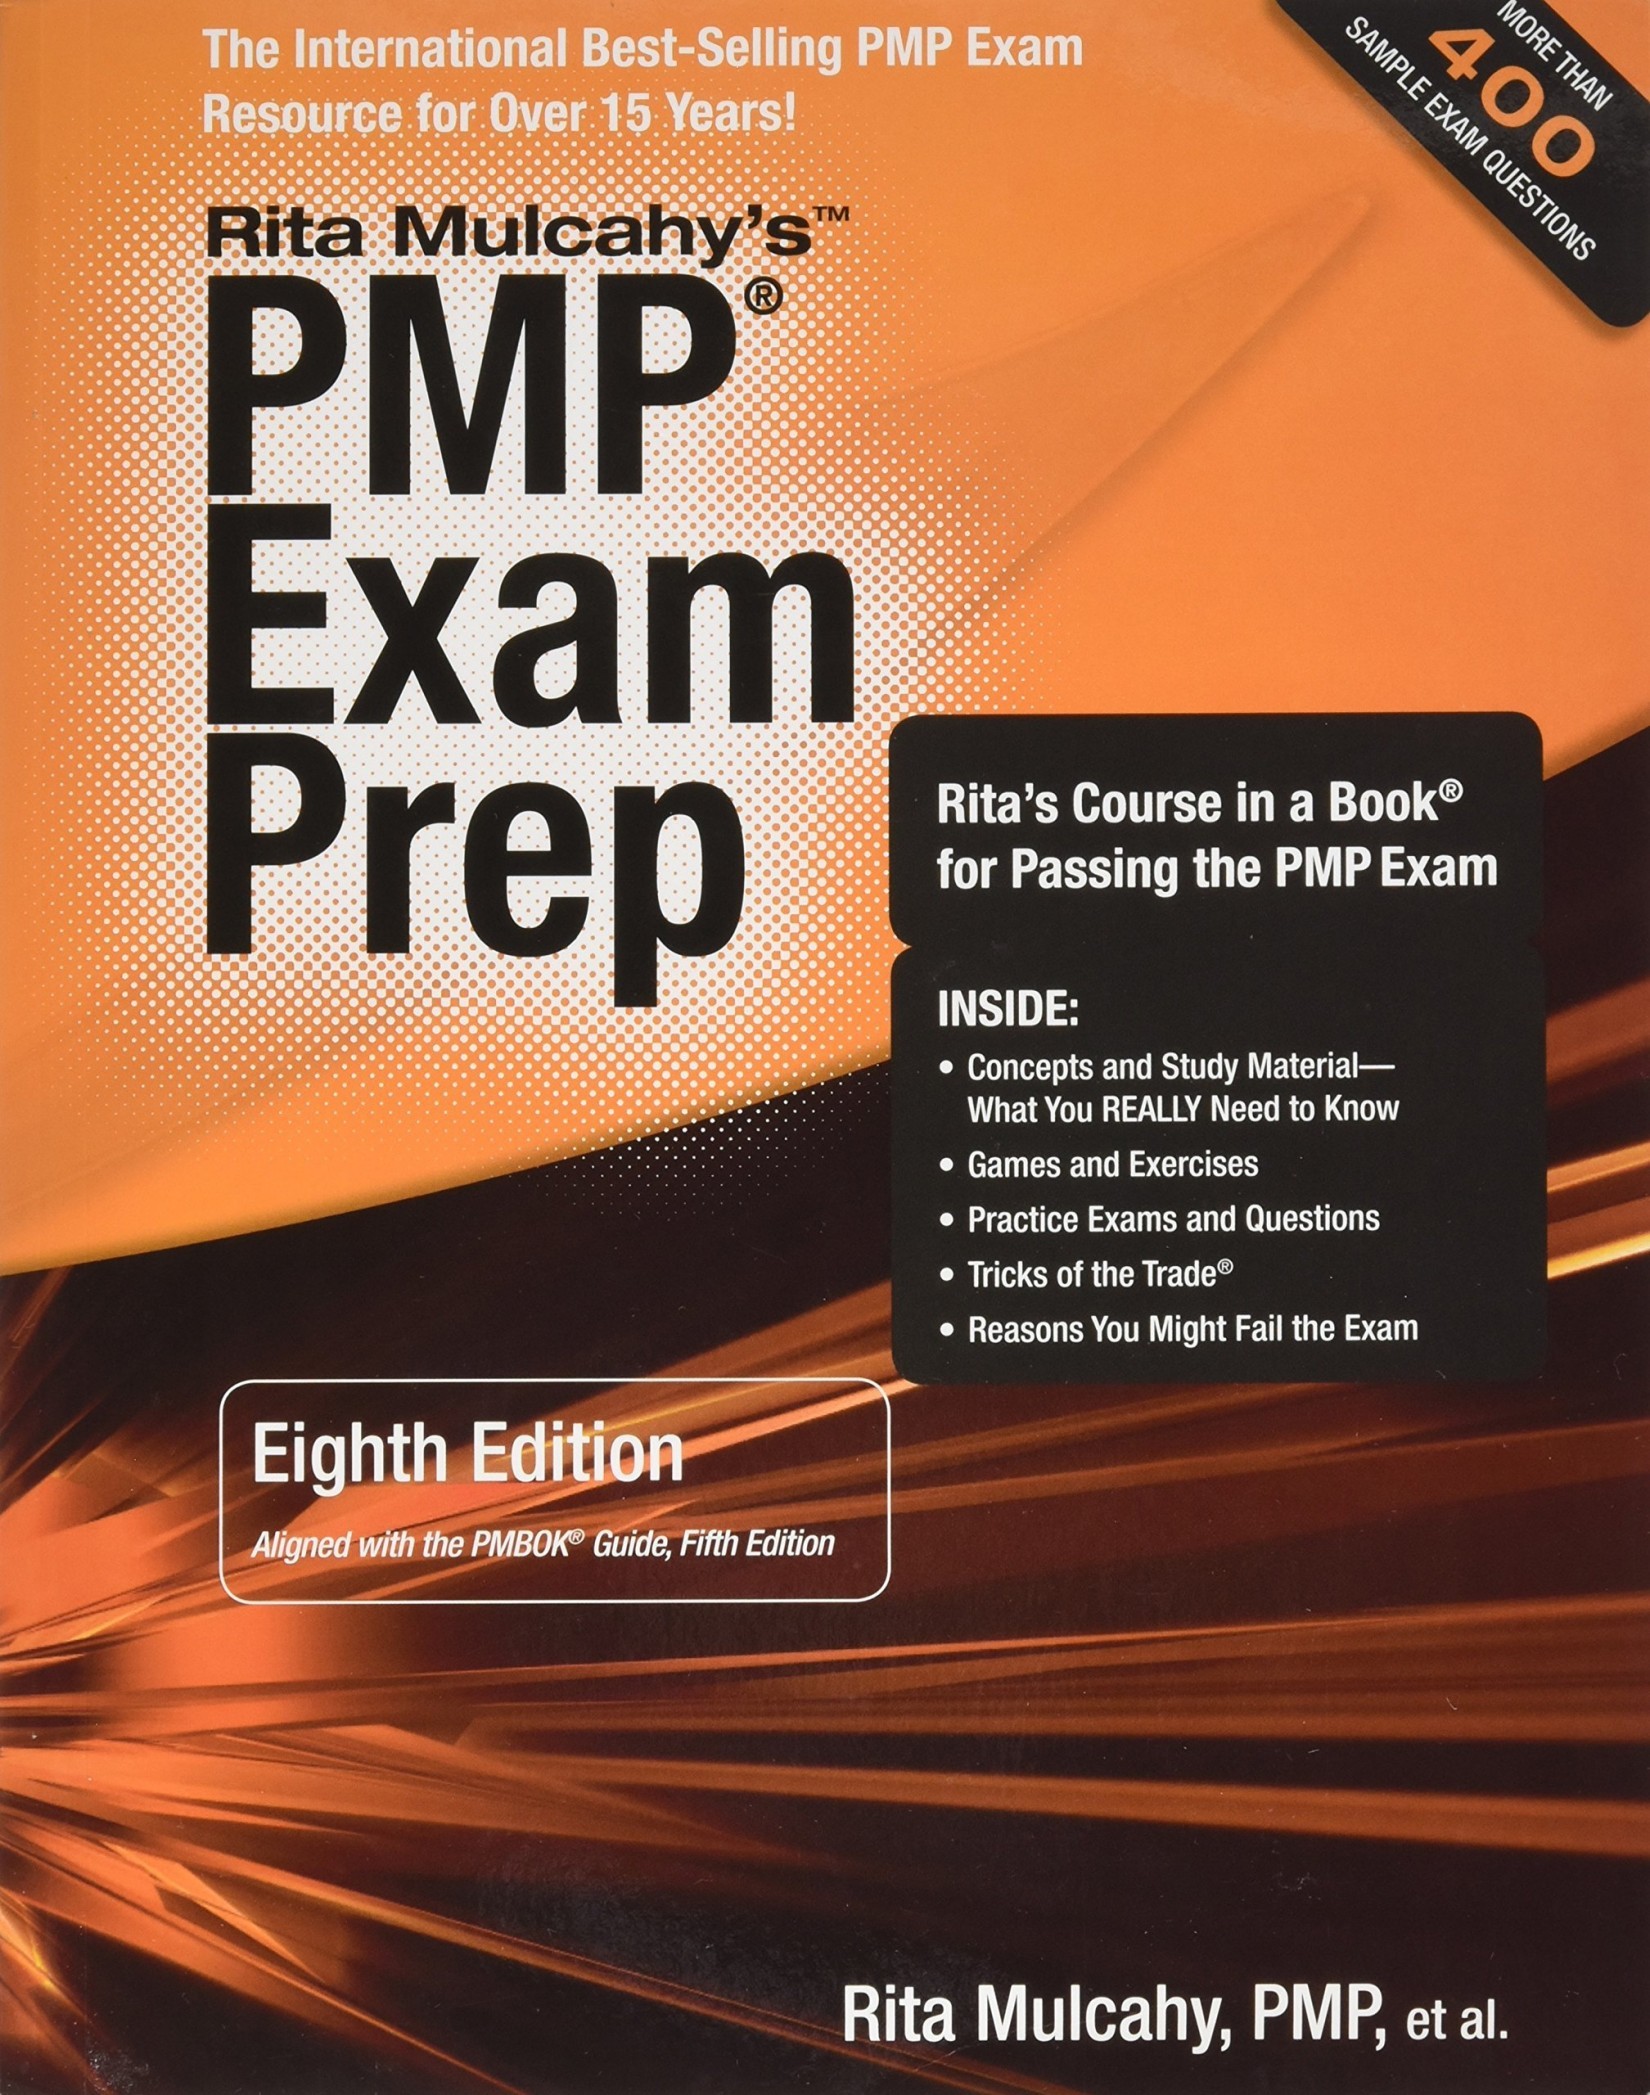 PMP® Exam Prep: Accelerated Learning to Pass PMI's PMP® Exam - 8th. Edition